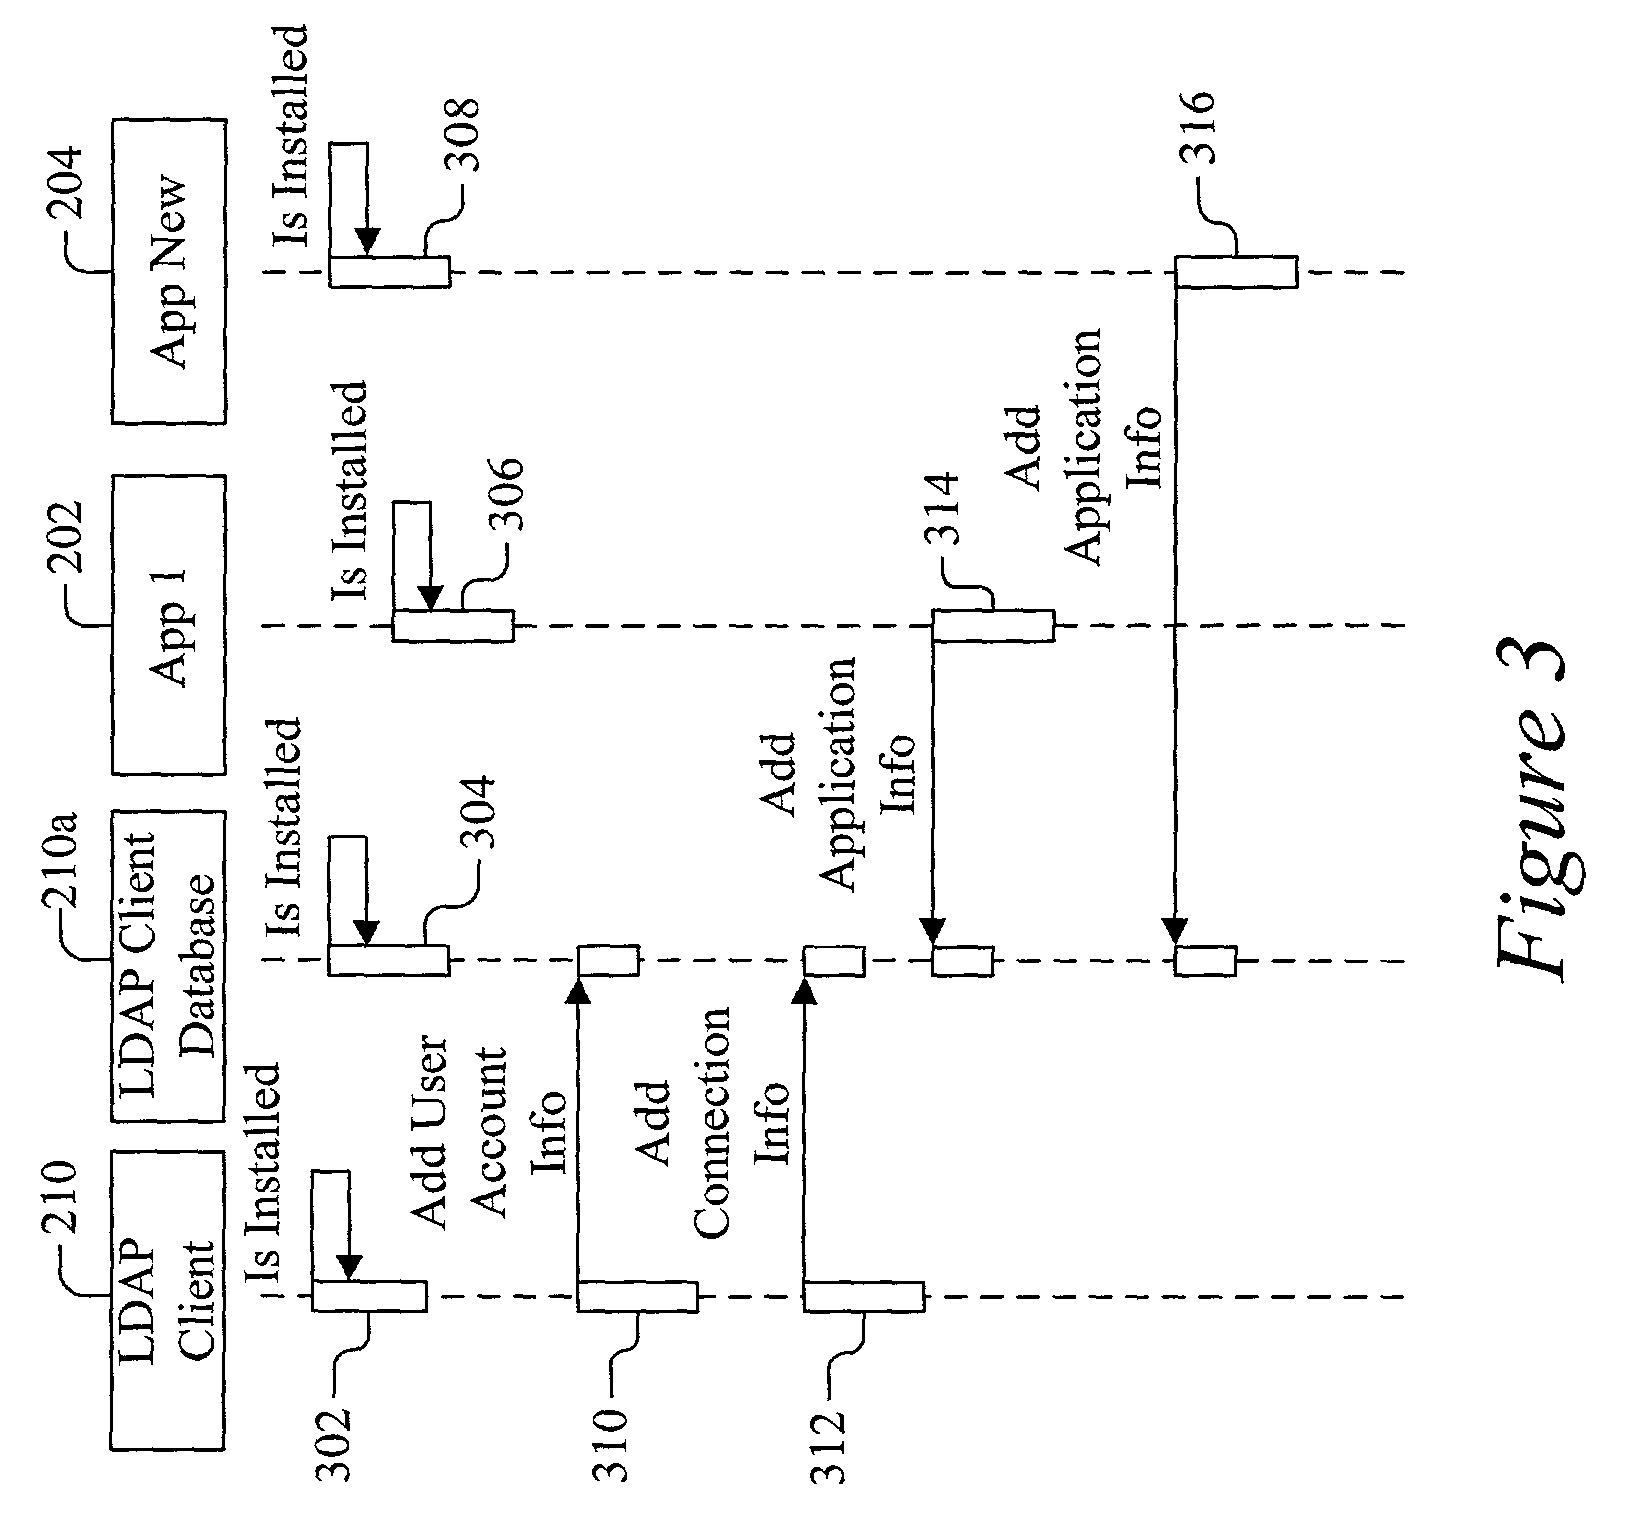 Method, device and computer program product including a lightweight directory access protocol client